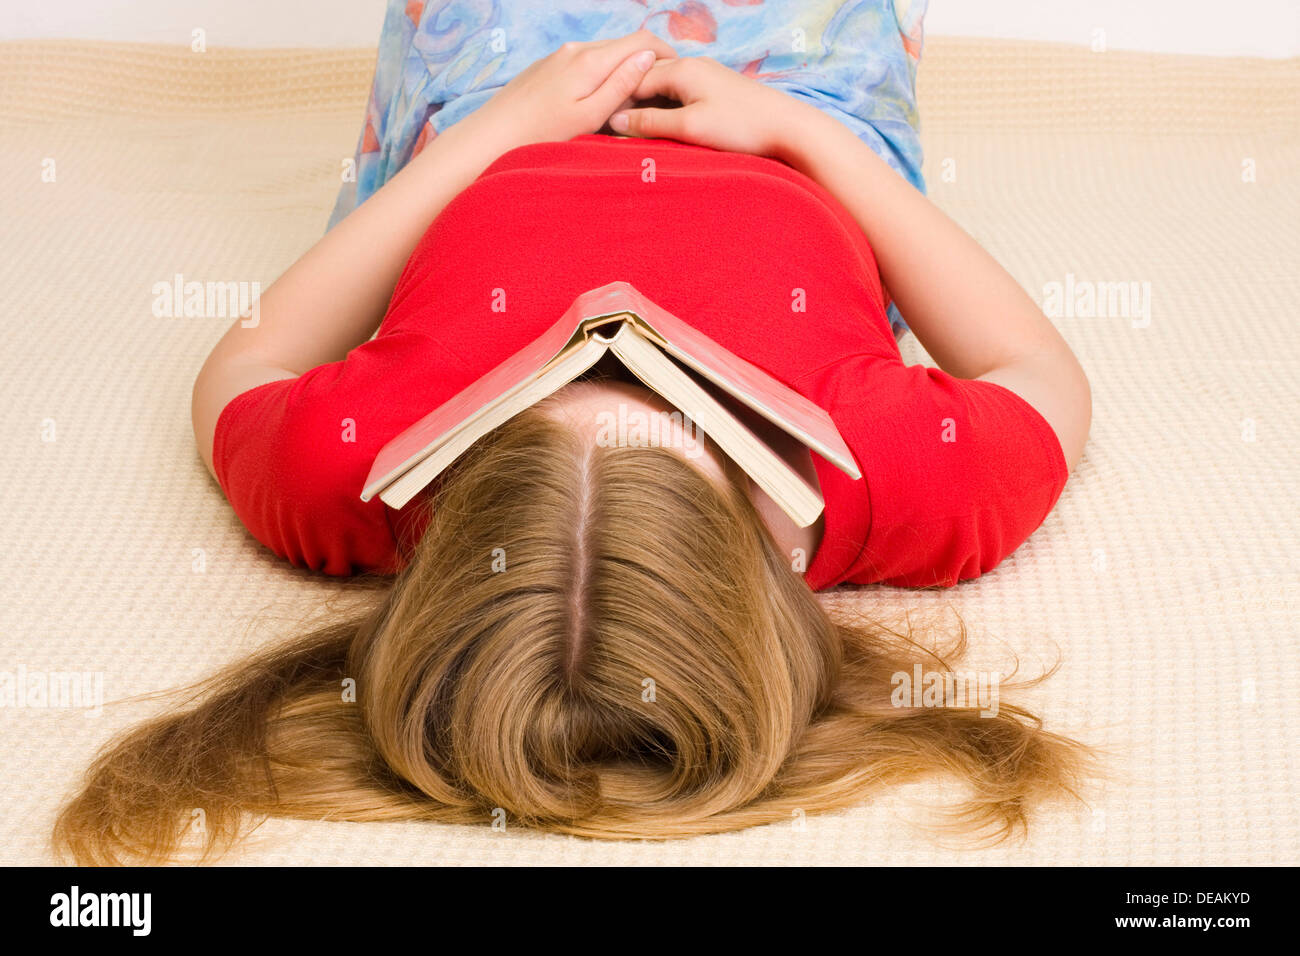 Girl, 17 years, lying on the floor covering her face with a book Stock Photo